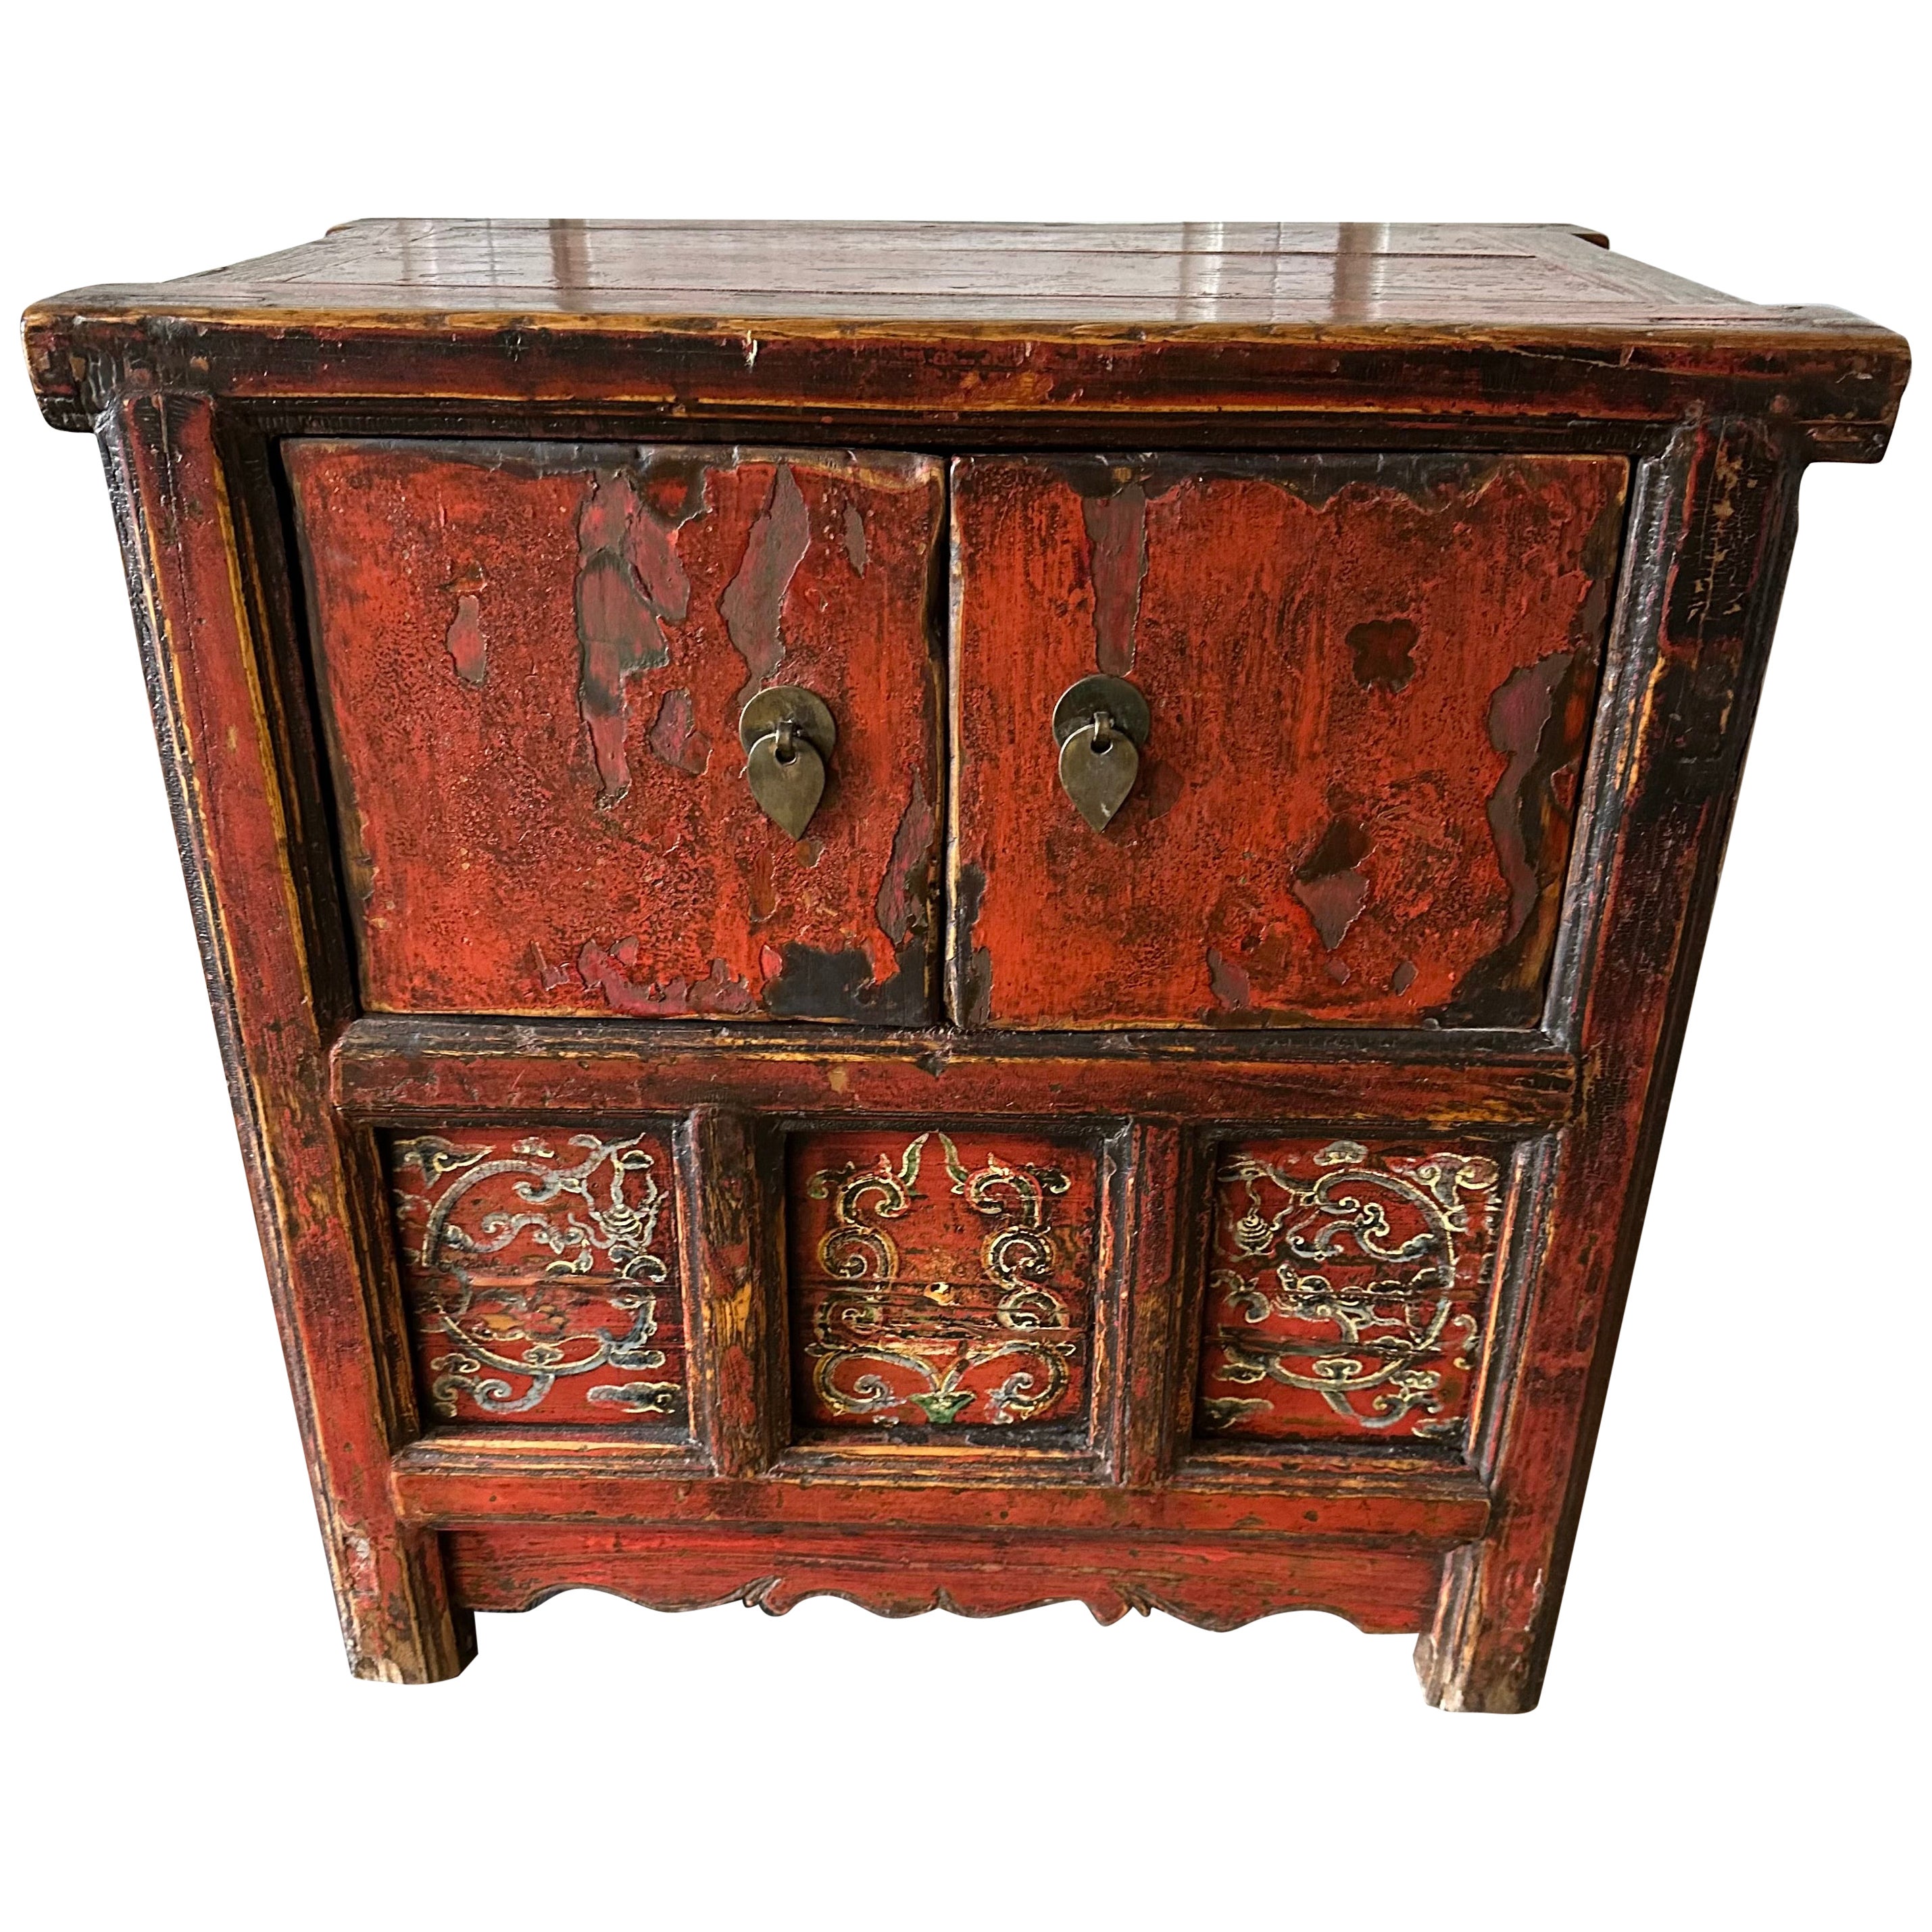 Late Qing Dynasty Low Chinese Red Lacquer Bedside Cabinet For Sale